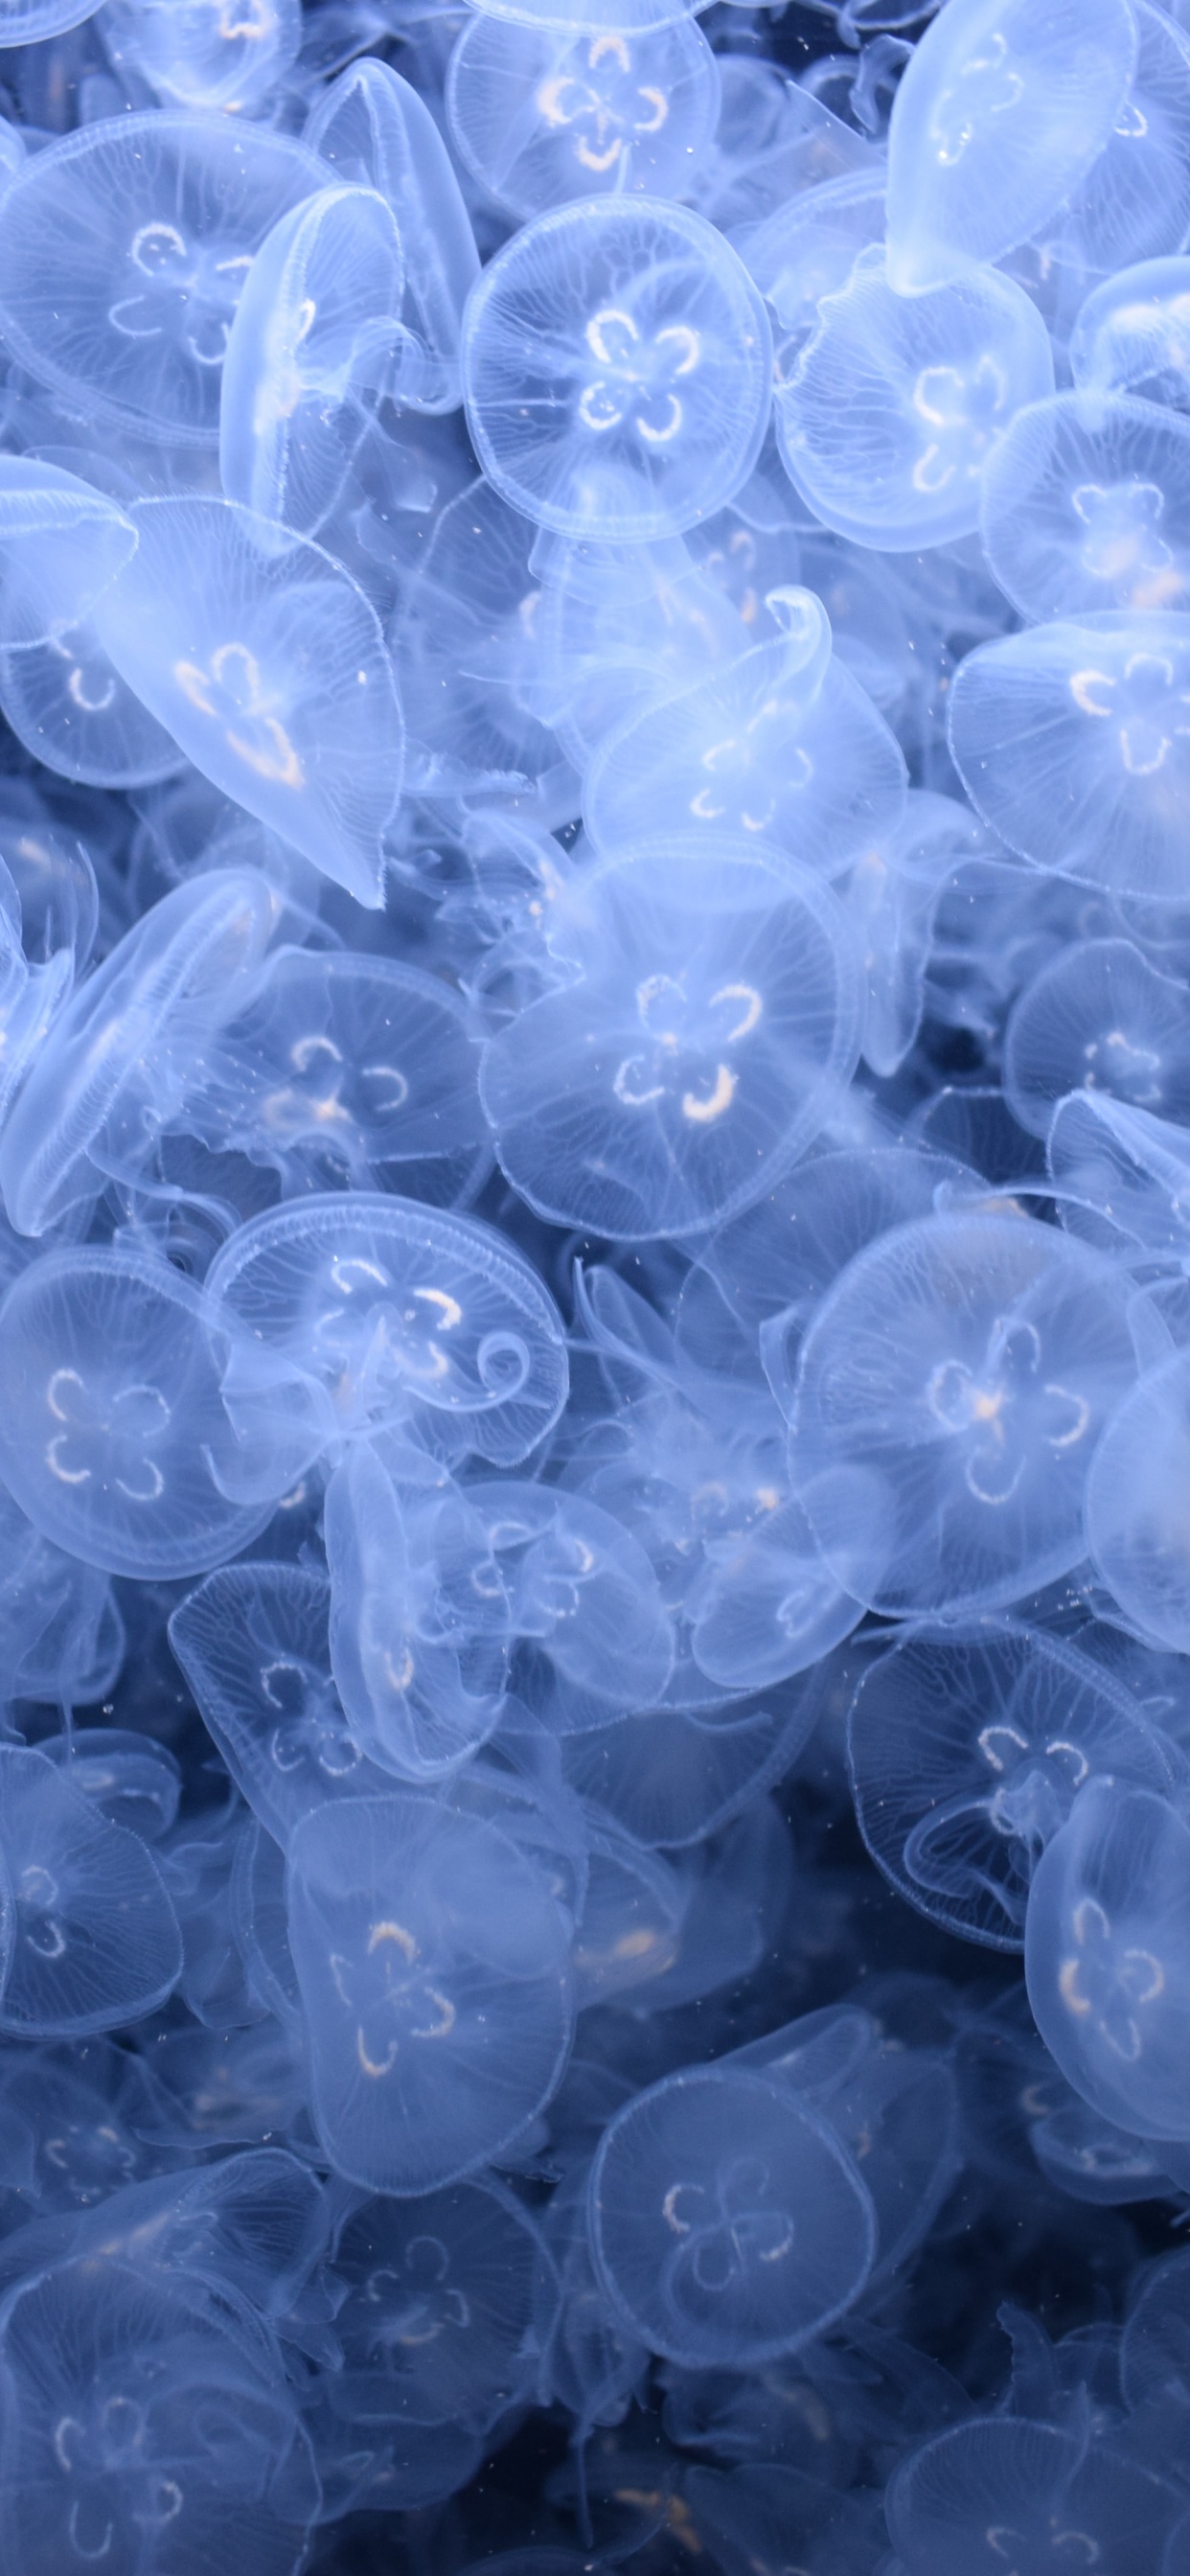 Jellyfish Background Images HD Pictures and Wallpaper For Free Download   Pngtree